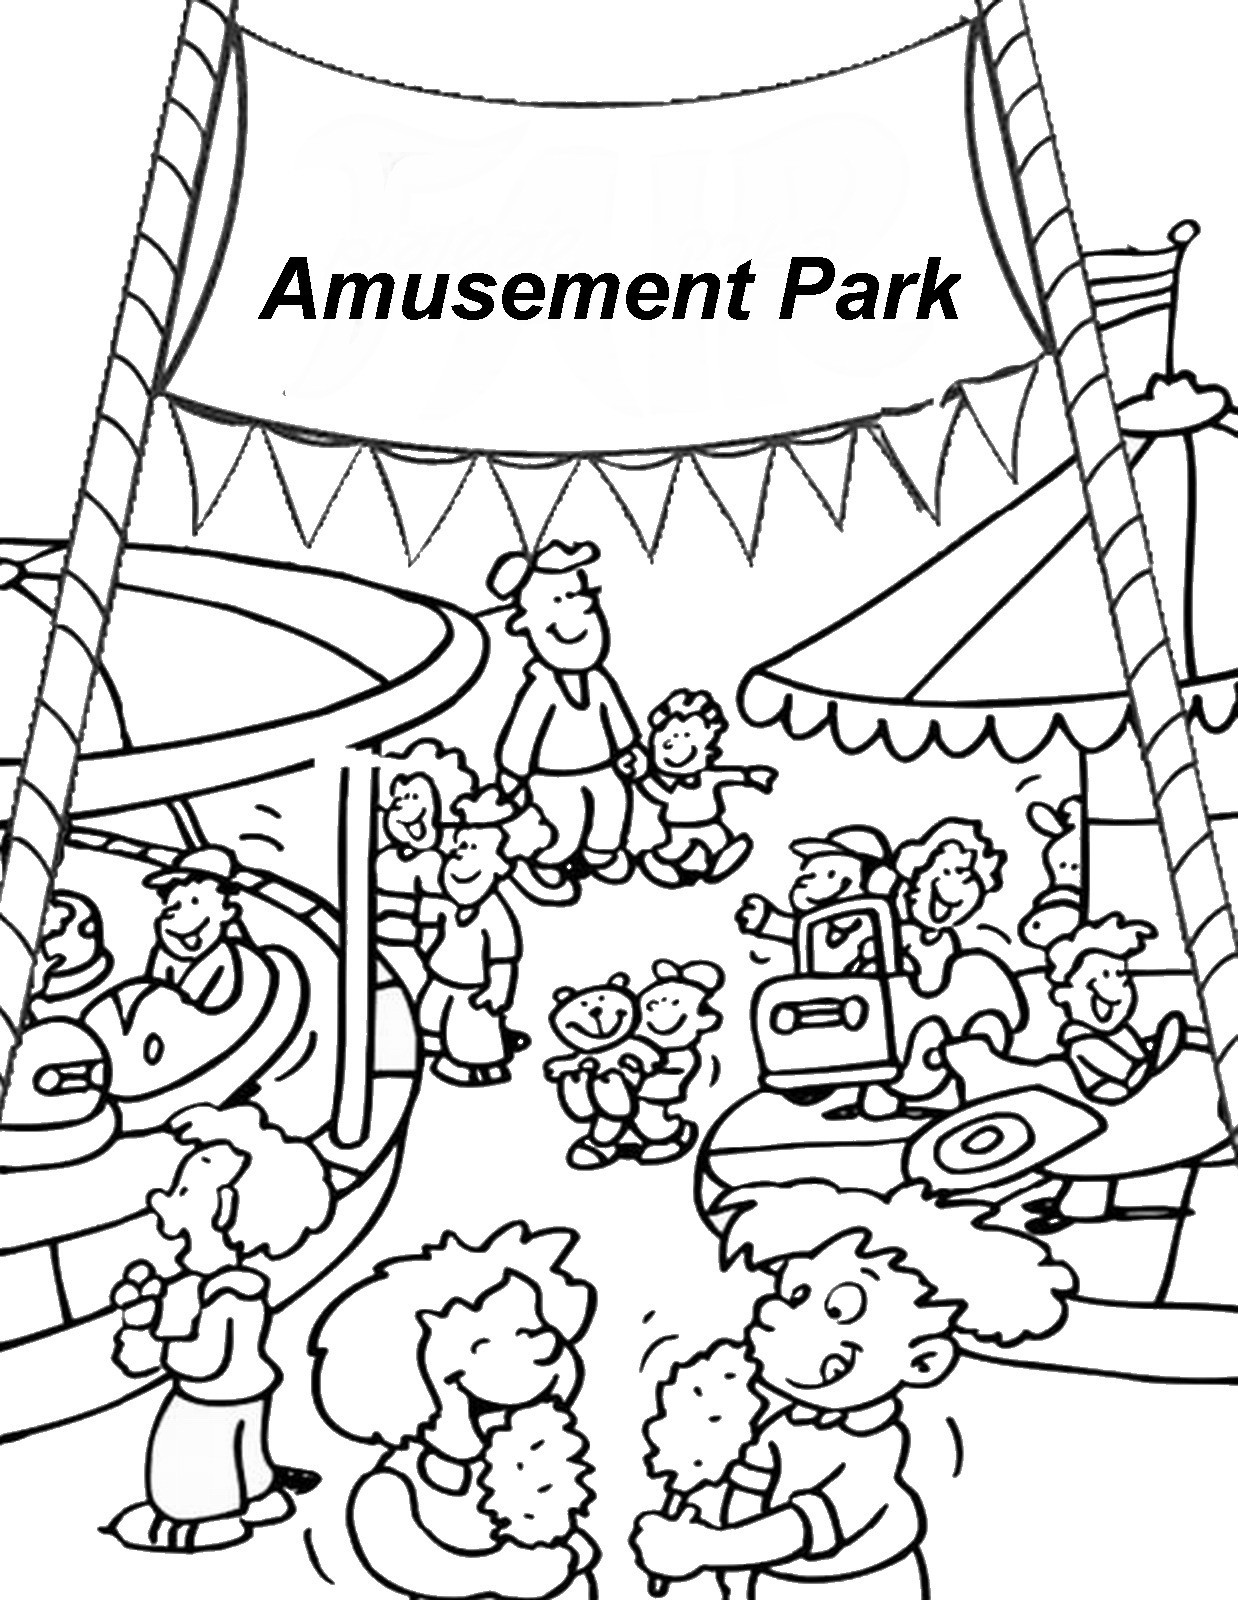 Printing A Coloring Book
 Amusement Park Coloring Pages